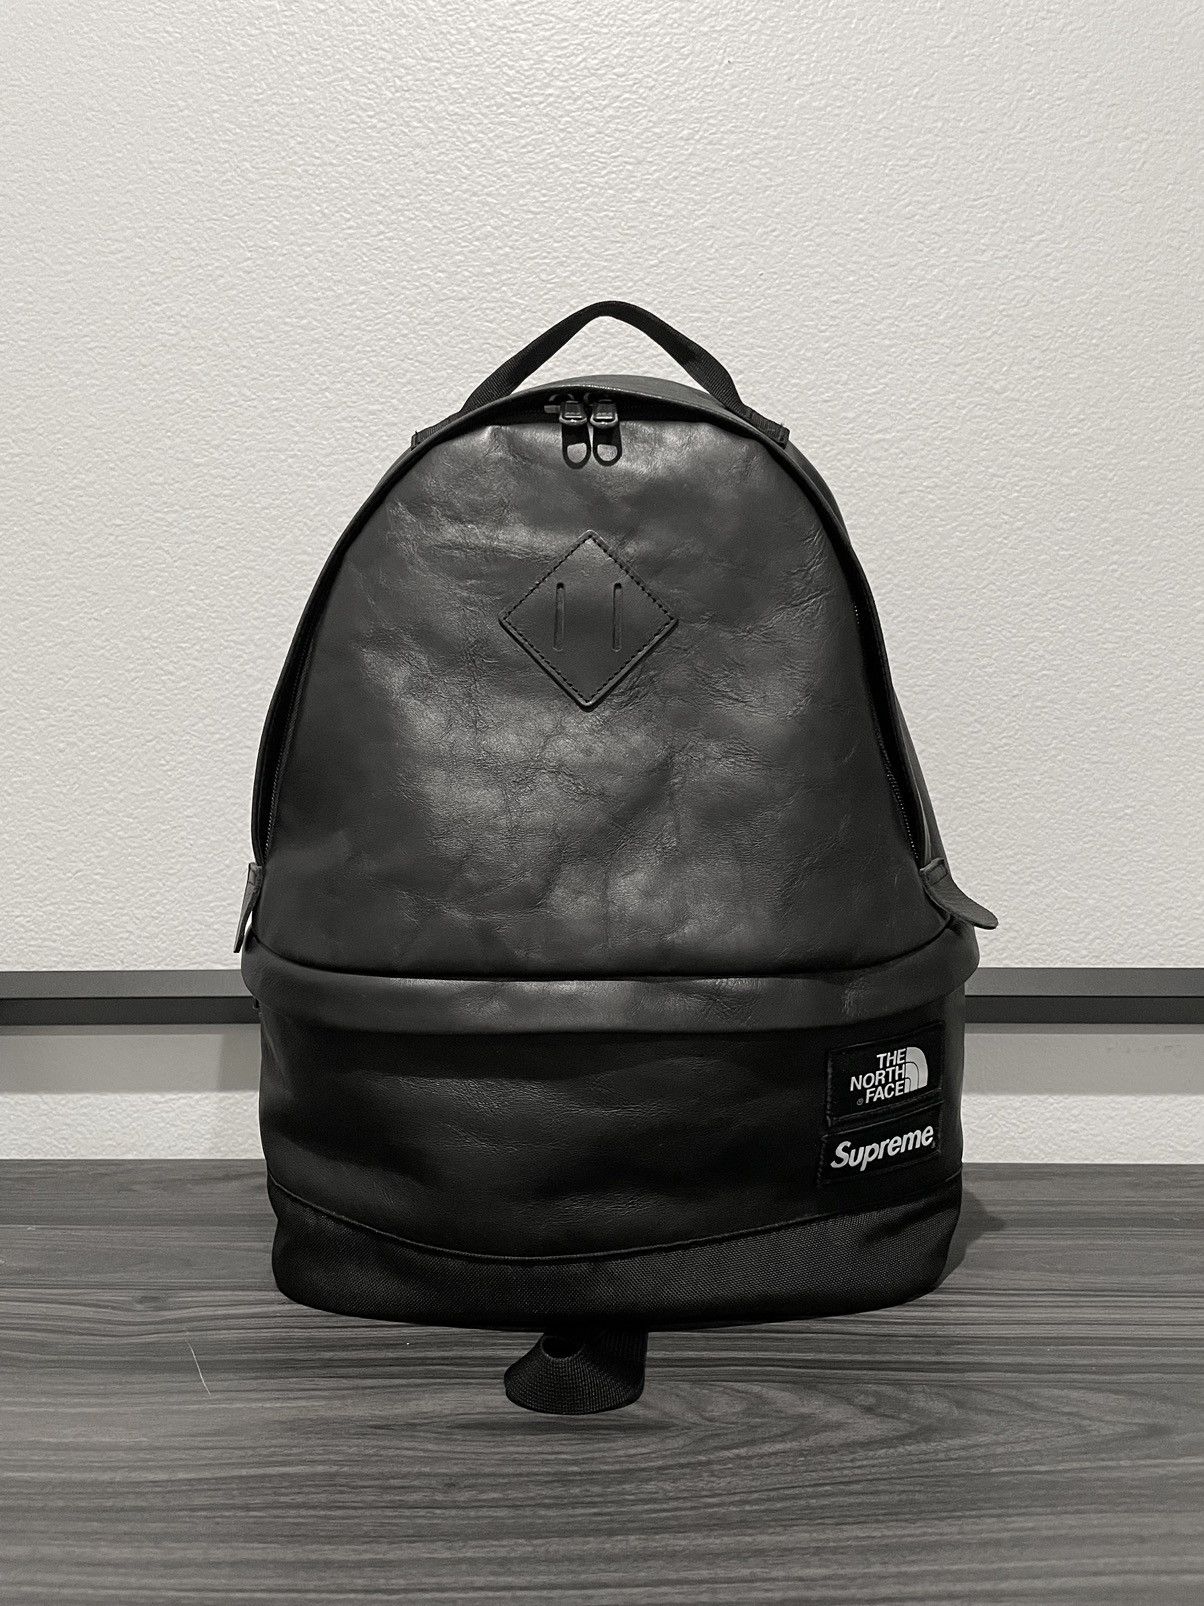 Supreme FW17 Supreme x The North Face Leather Day Pack backpack bag |  Grailed